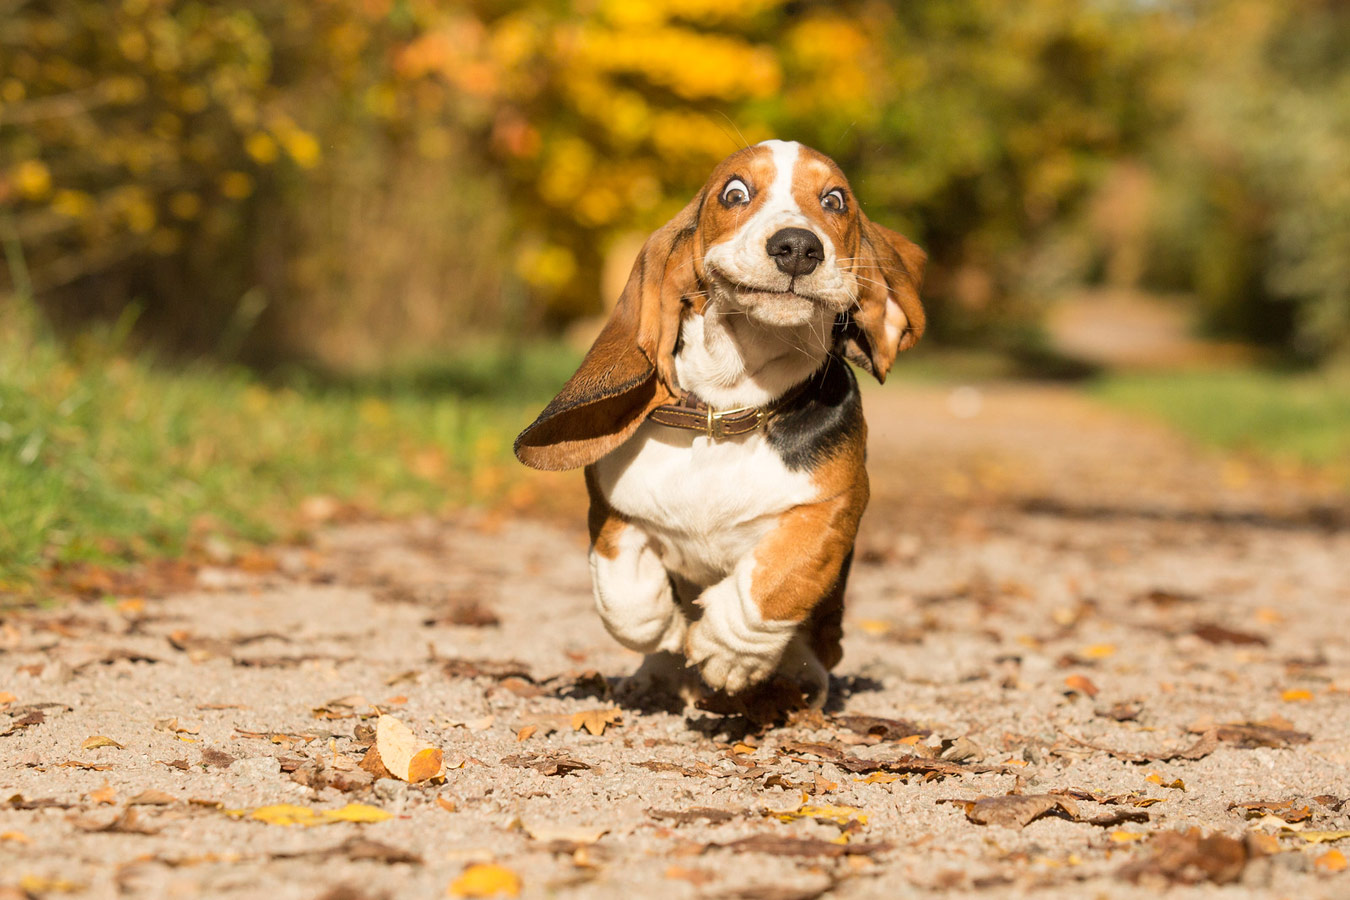 Happy Chappy!, © Katrina Wilson, UK, Judges’ Special Mention Puppies Category, Dog Photographer of the Year